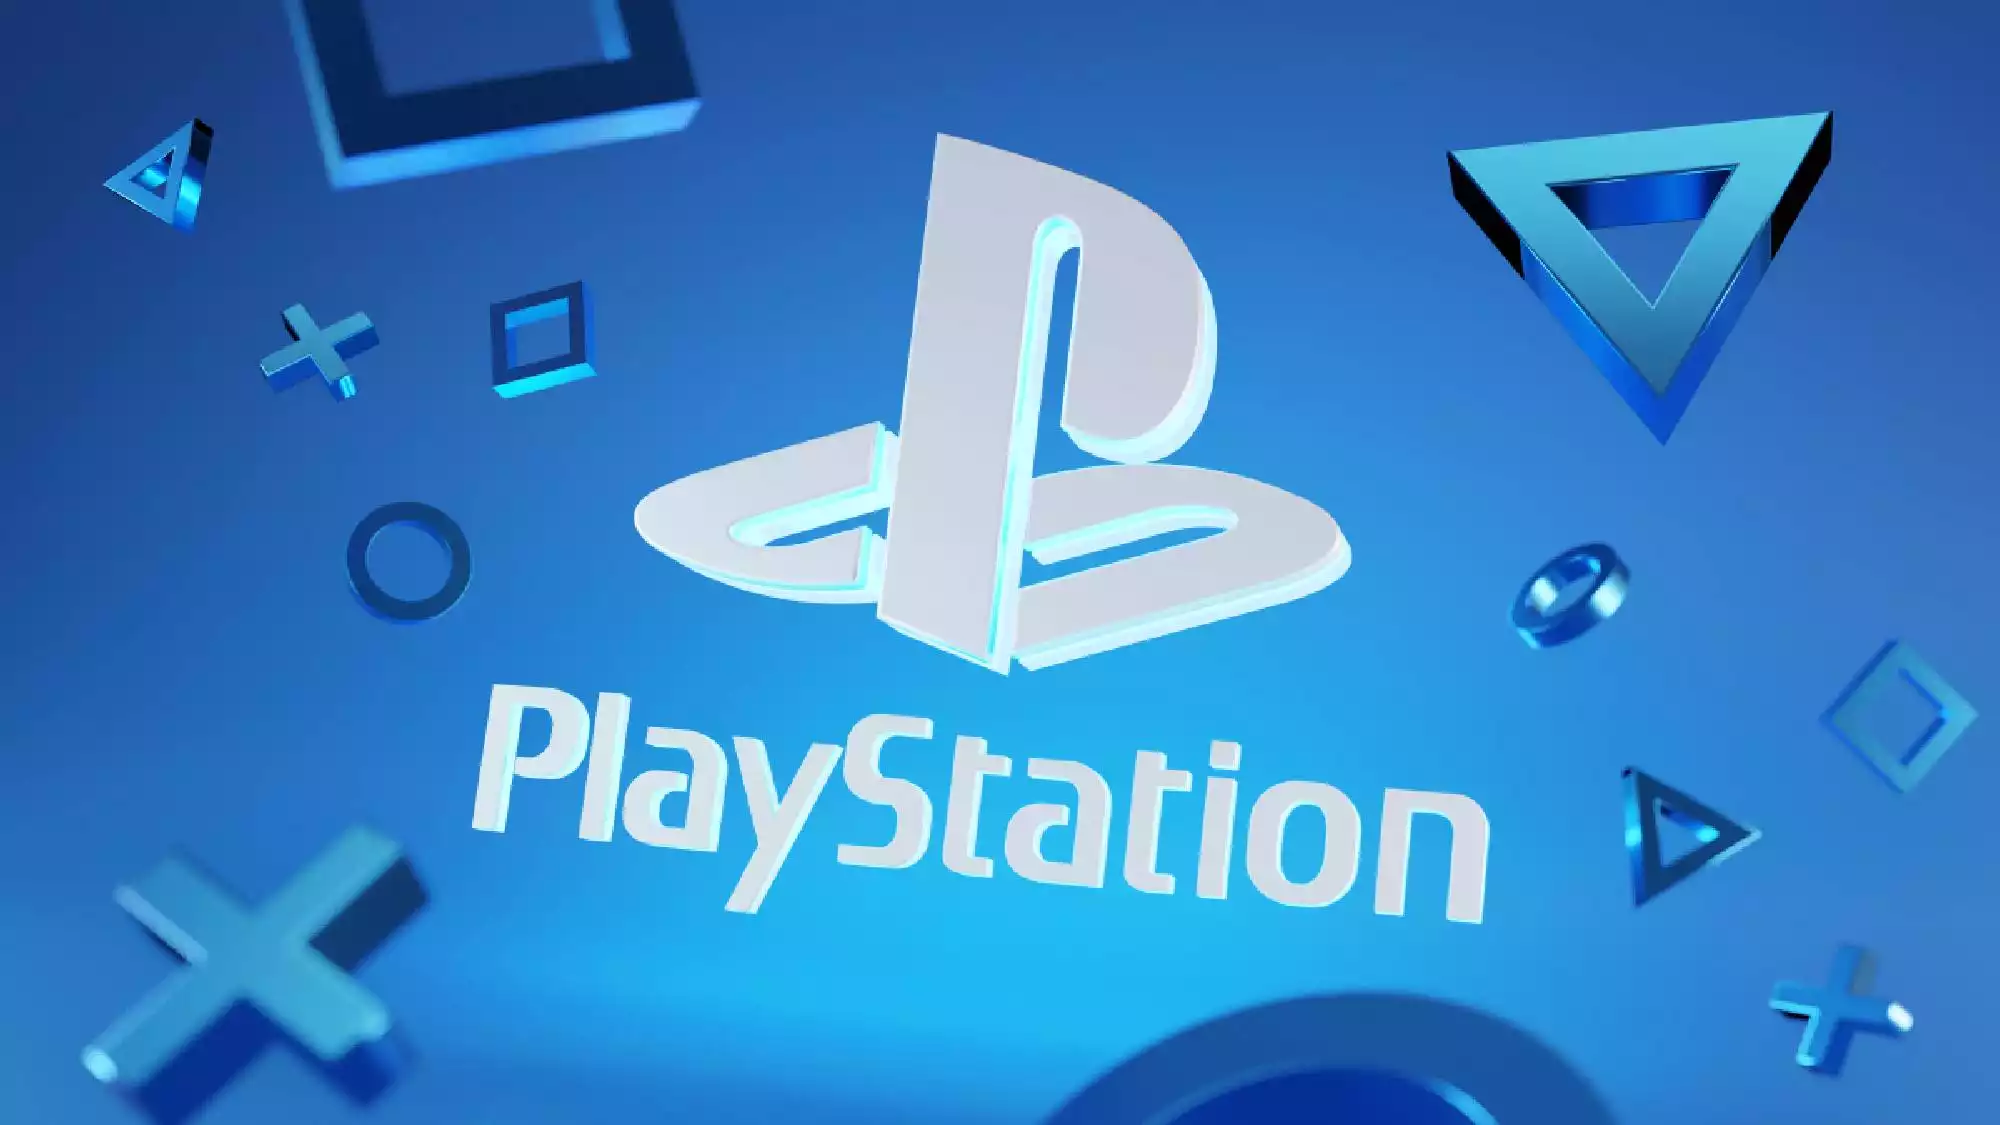 New Sony Patent could make gaming easier based on players' skills and weaknesses